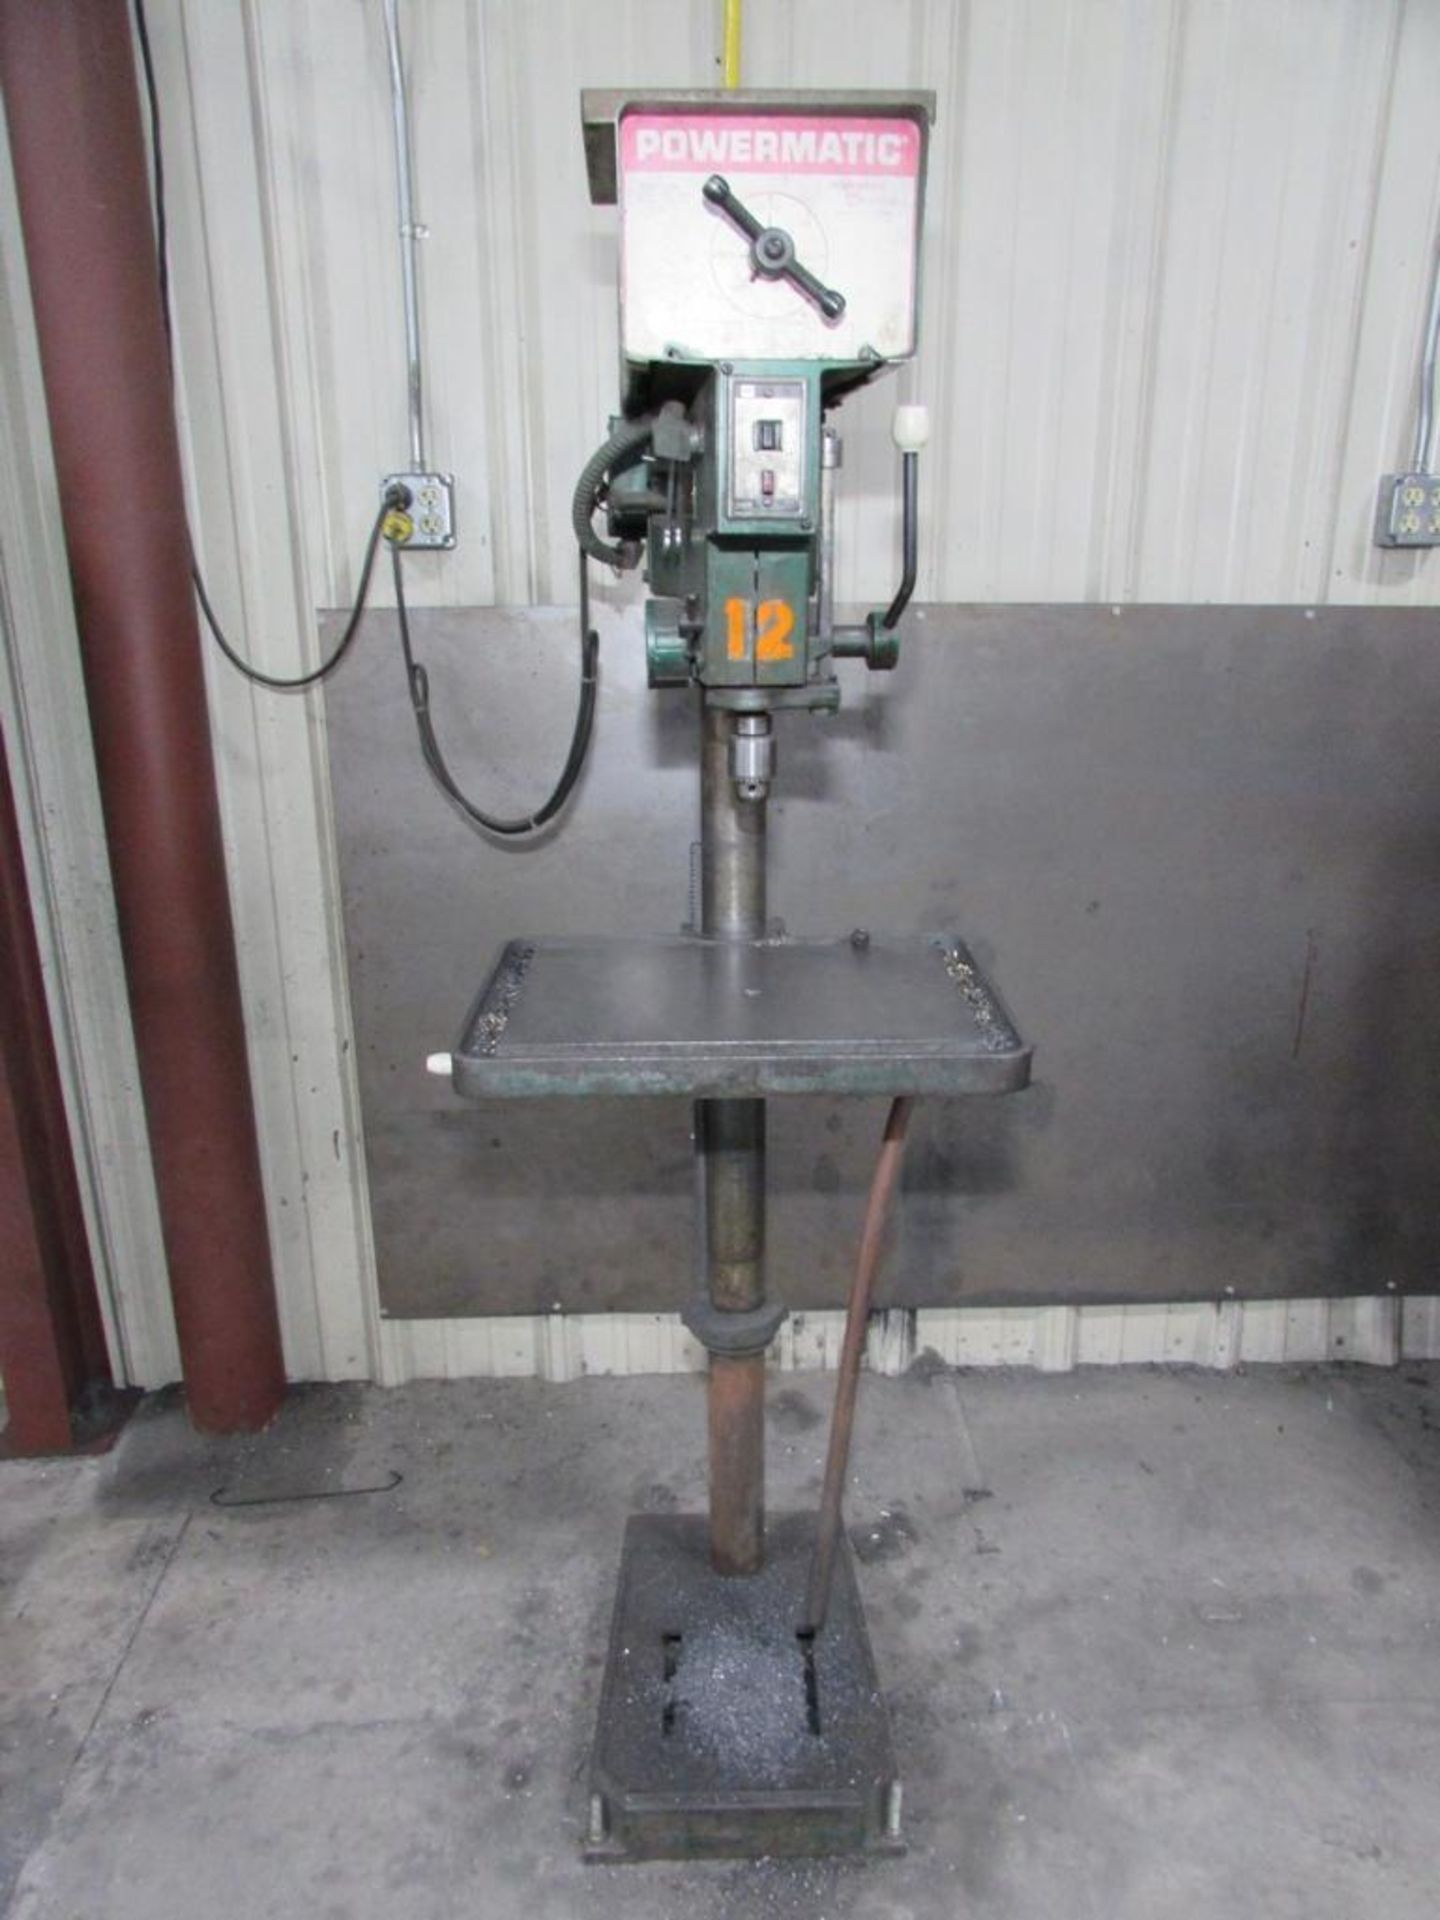 Powermatic Houdaille 1150A 15" Floor Standing Drill Press, 18"x12" Table, 1/2" Jacobs Chuck, 6" Stro - Image 2 of 9